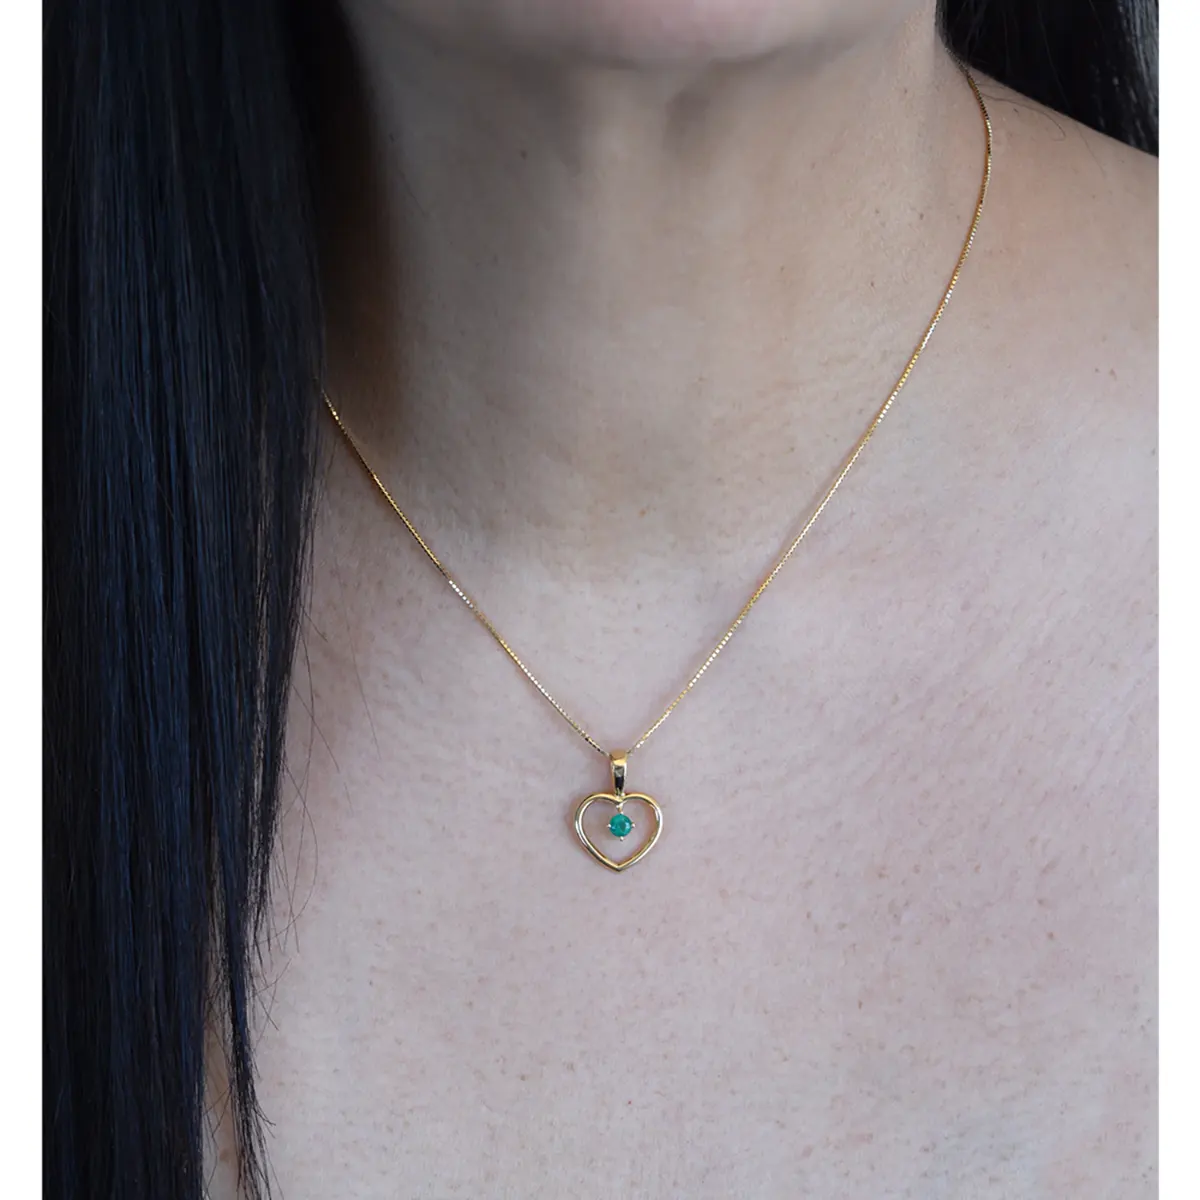 The excellent quality of the round emerald and the rich yellow color of the heart shape make this pendant colorful and unique as shown on the models neck